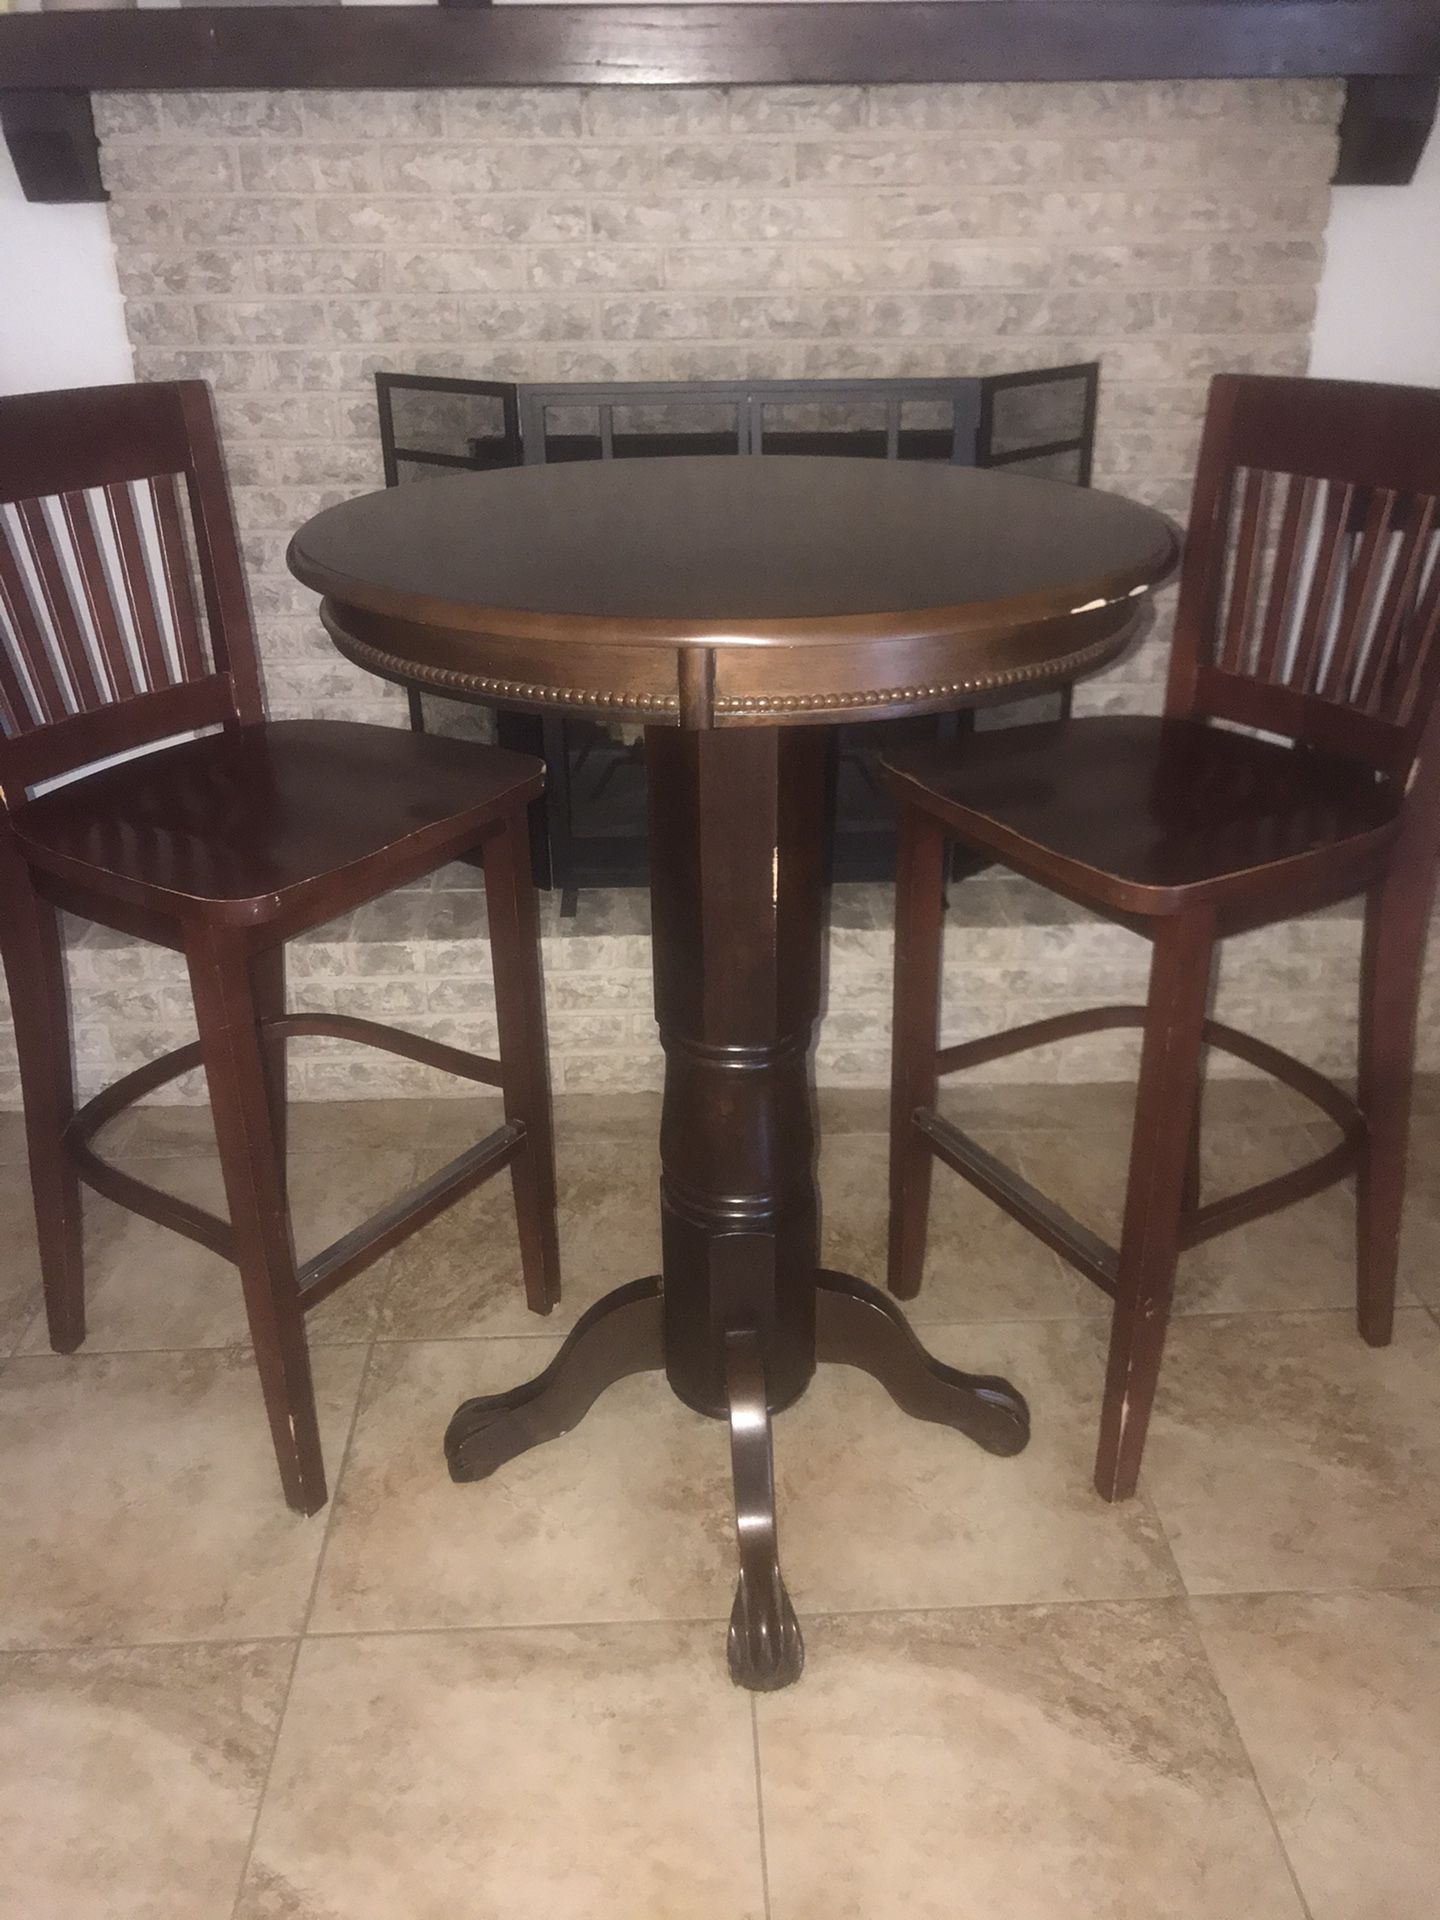 Pub table with restaurant quality bar chairs